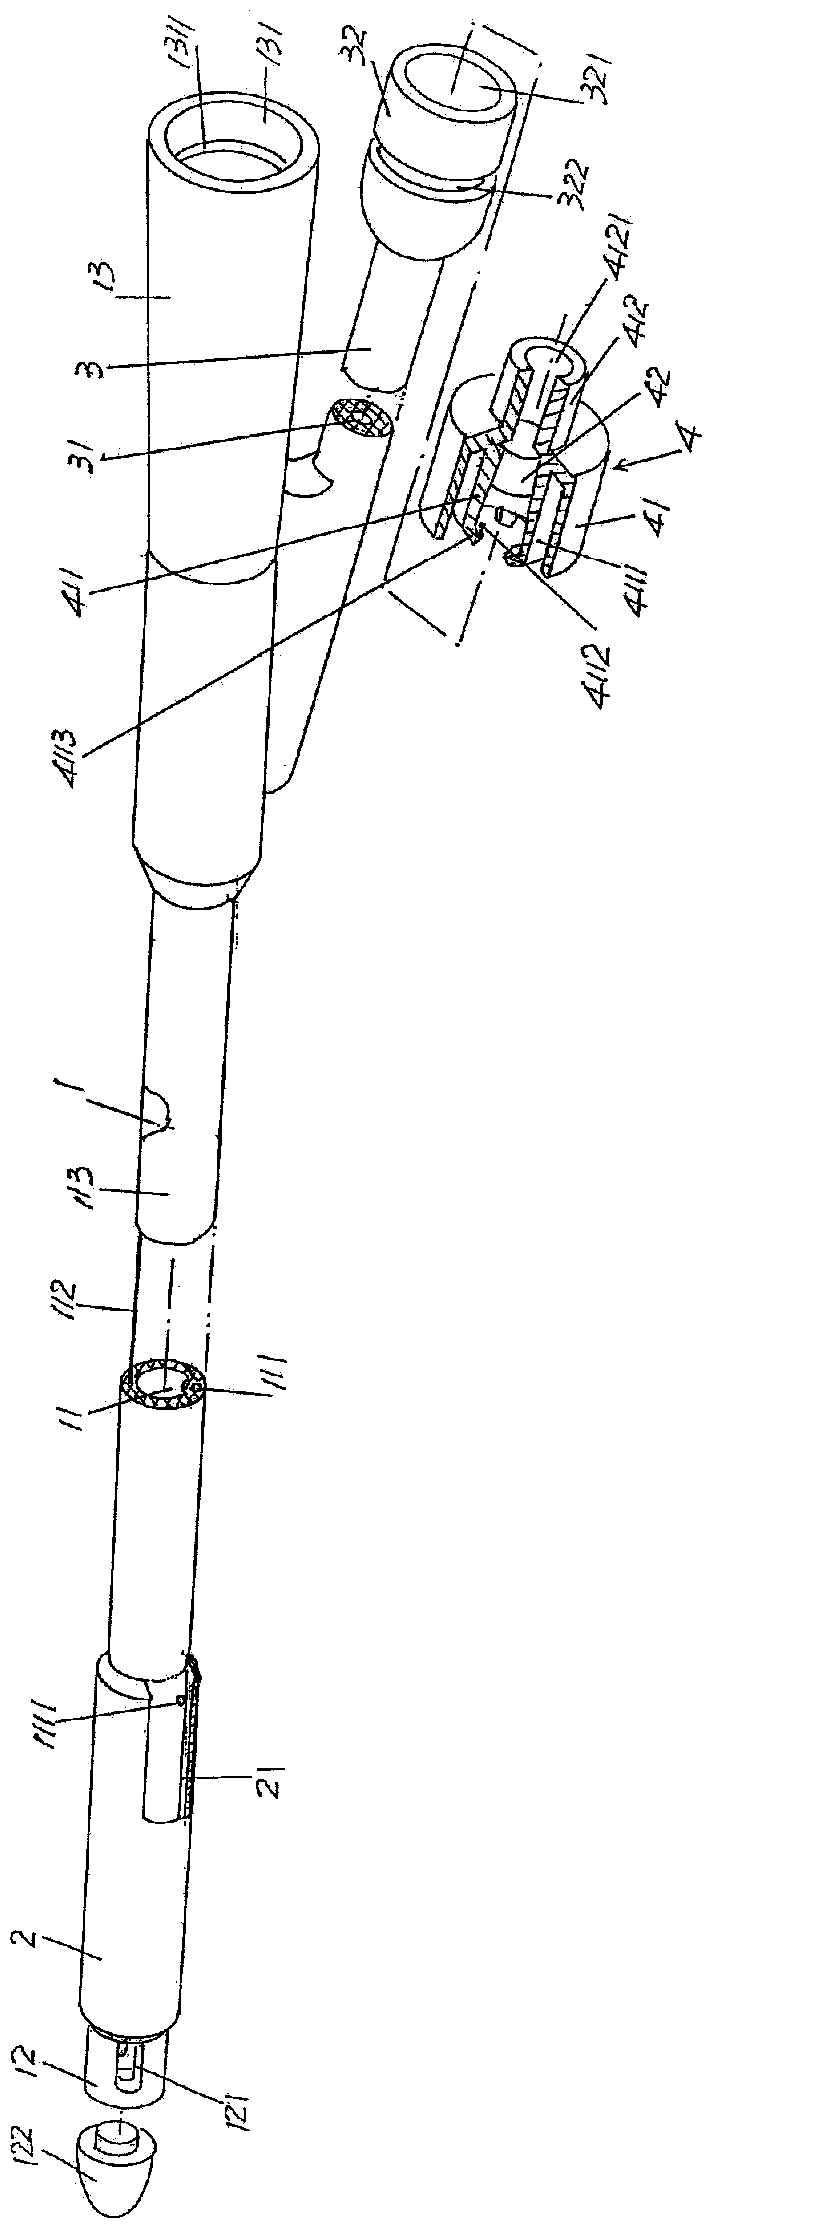 Sterile super-lubricity antiseep safety catheter structure